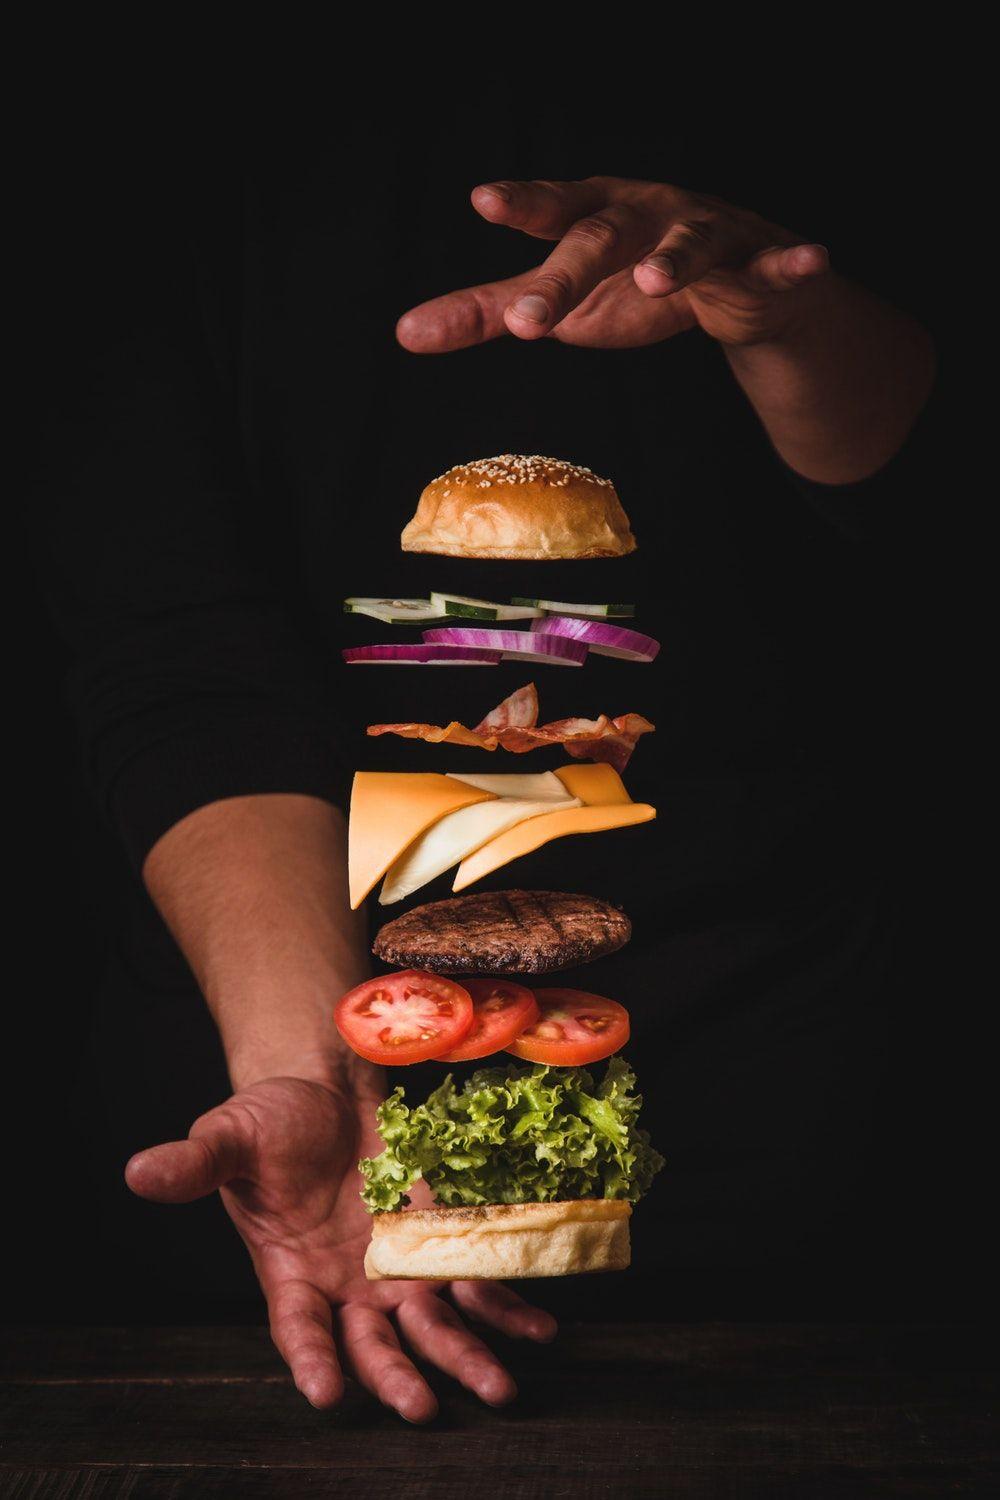 Hamburger Picture. Download Free Image